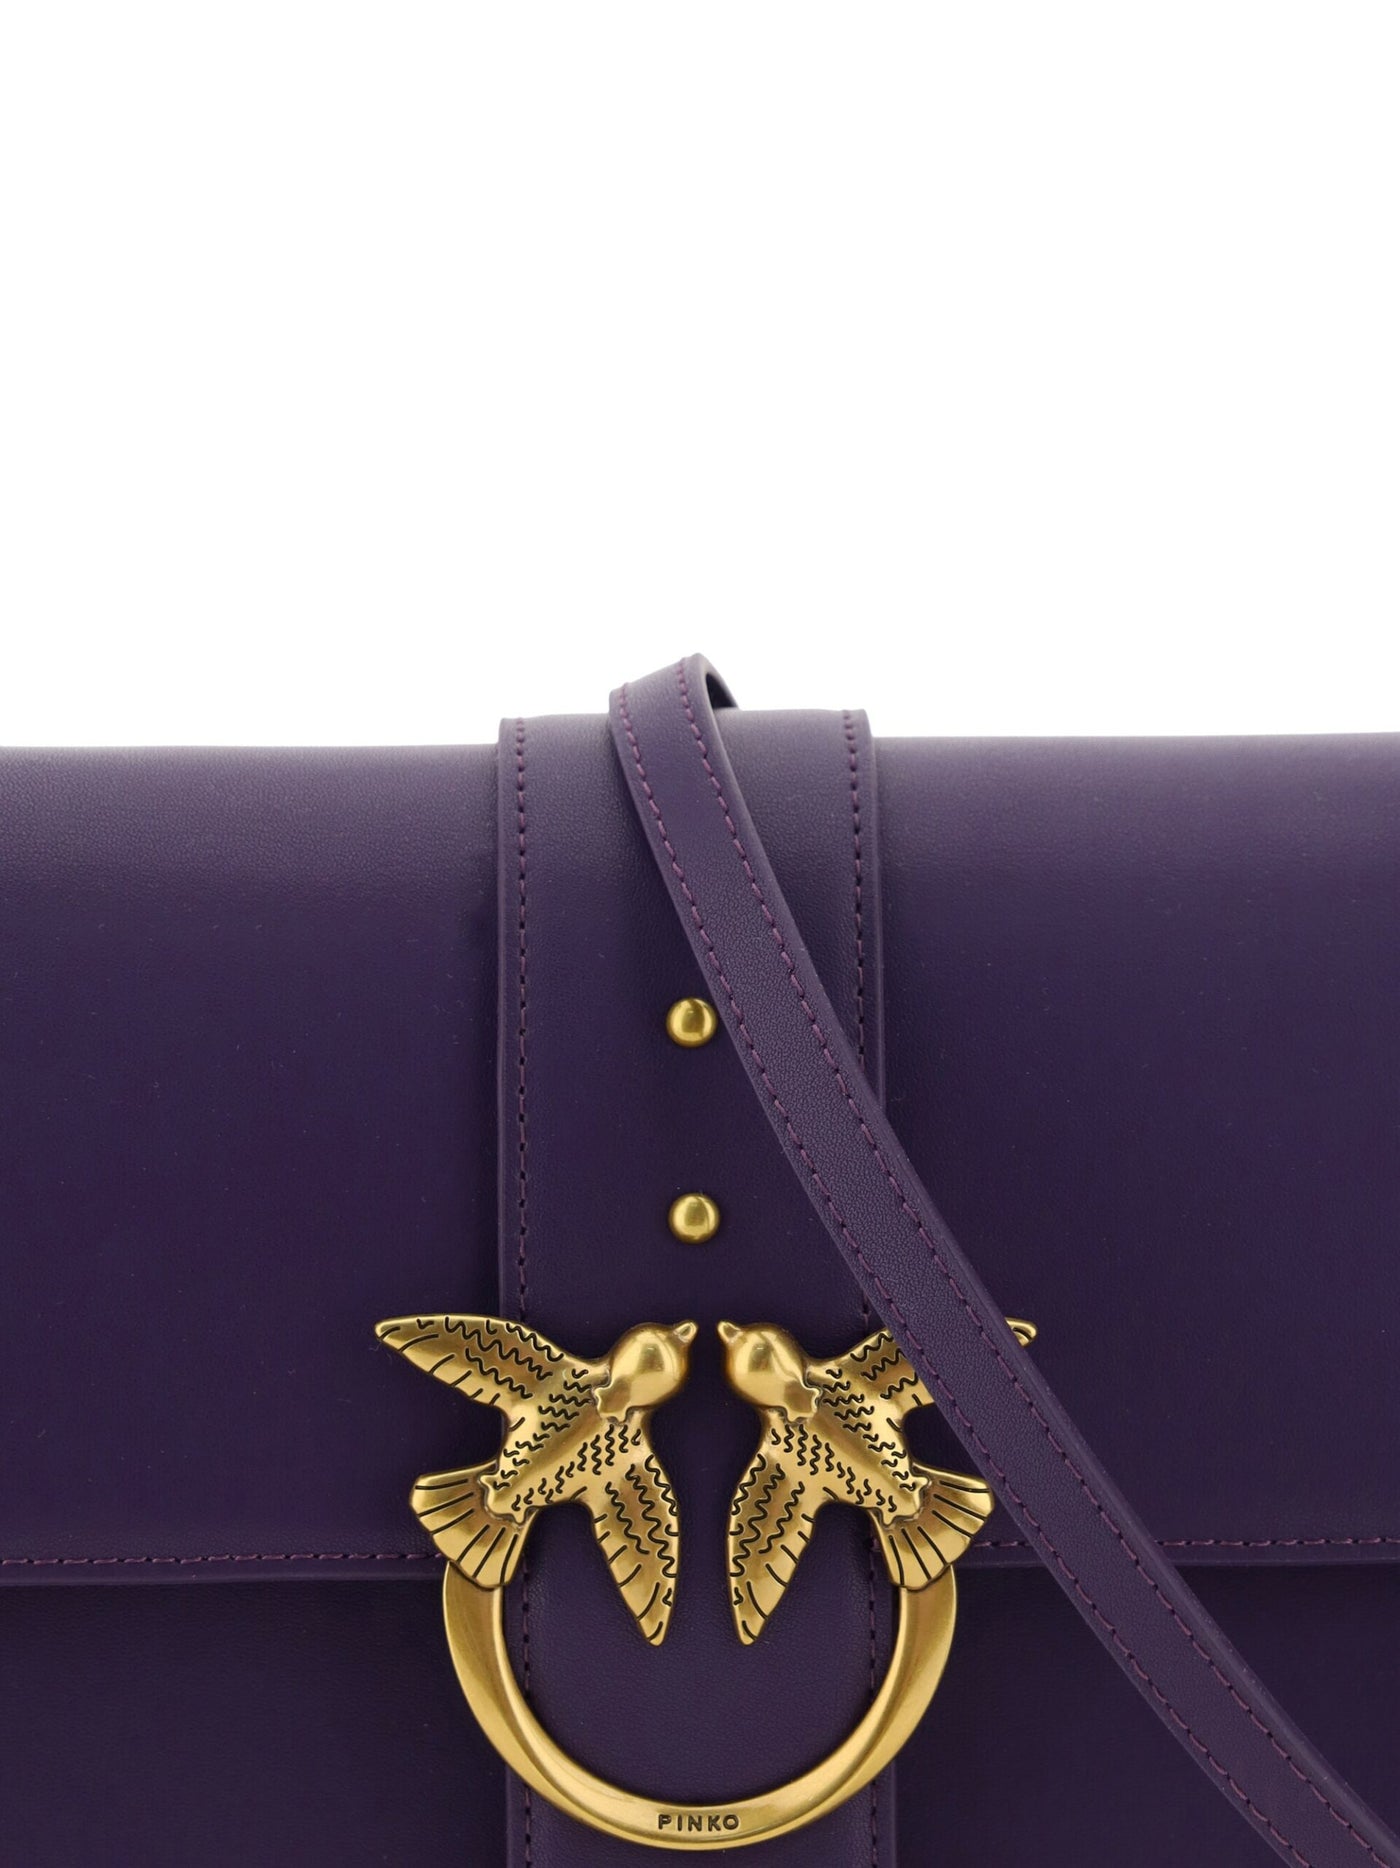 Purple Leather Love One Classic Shoulder Bag